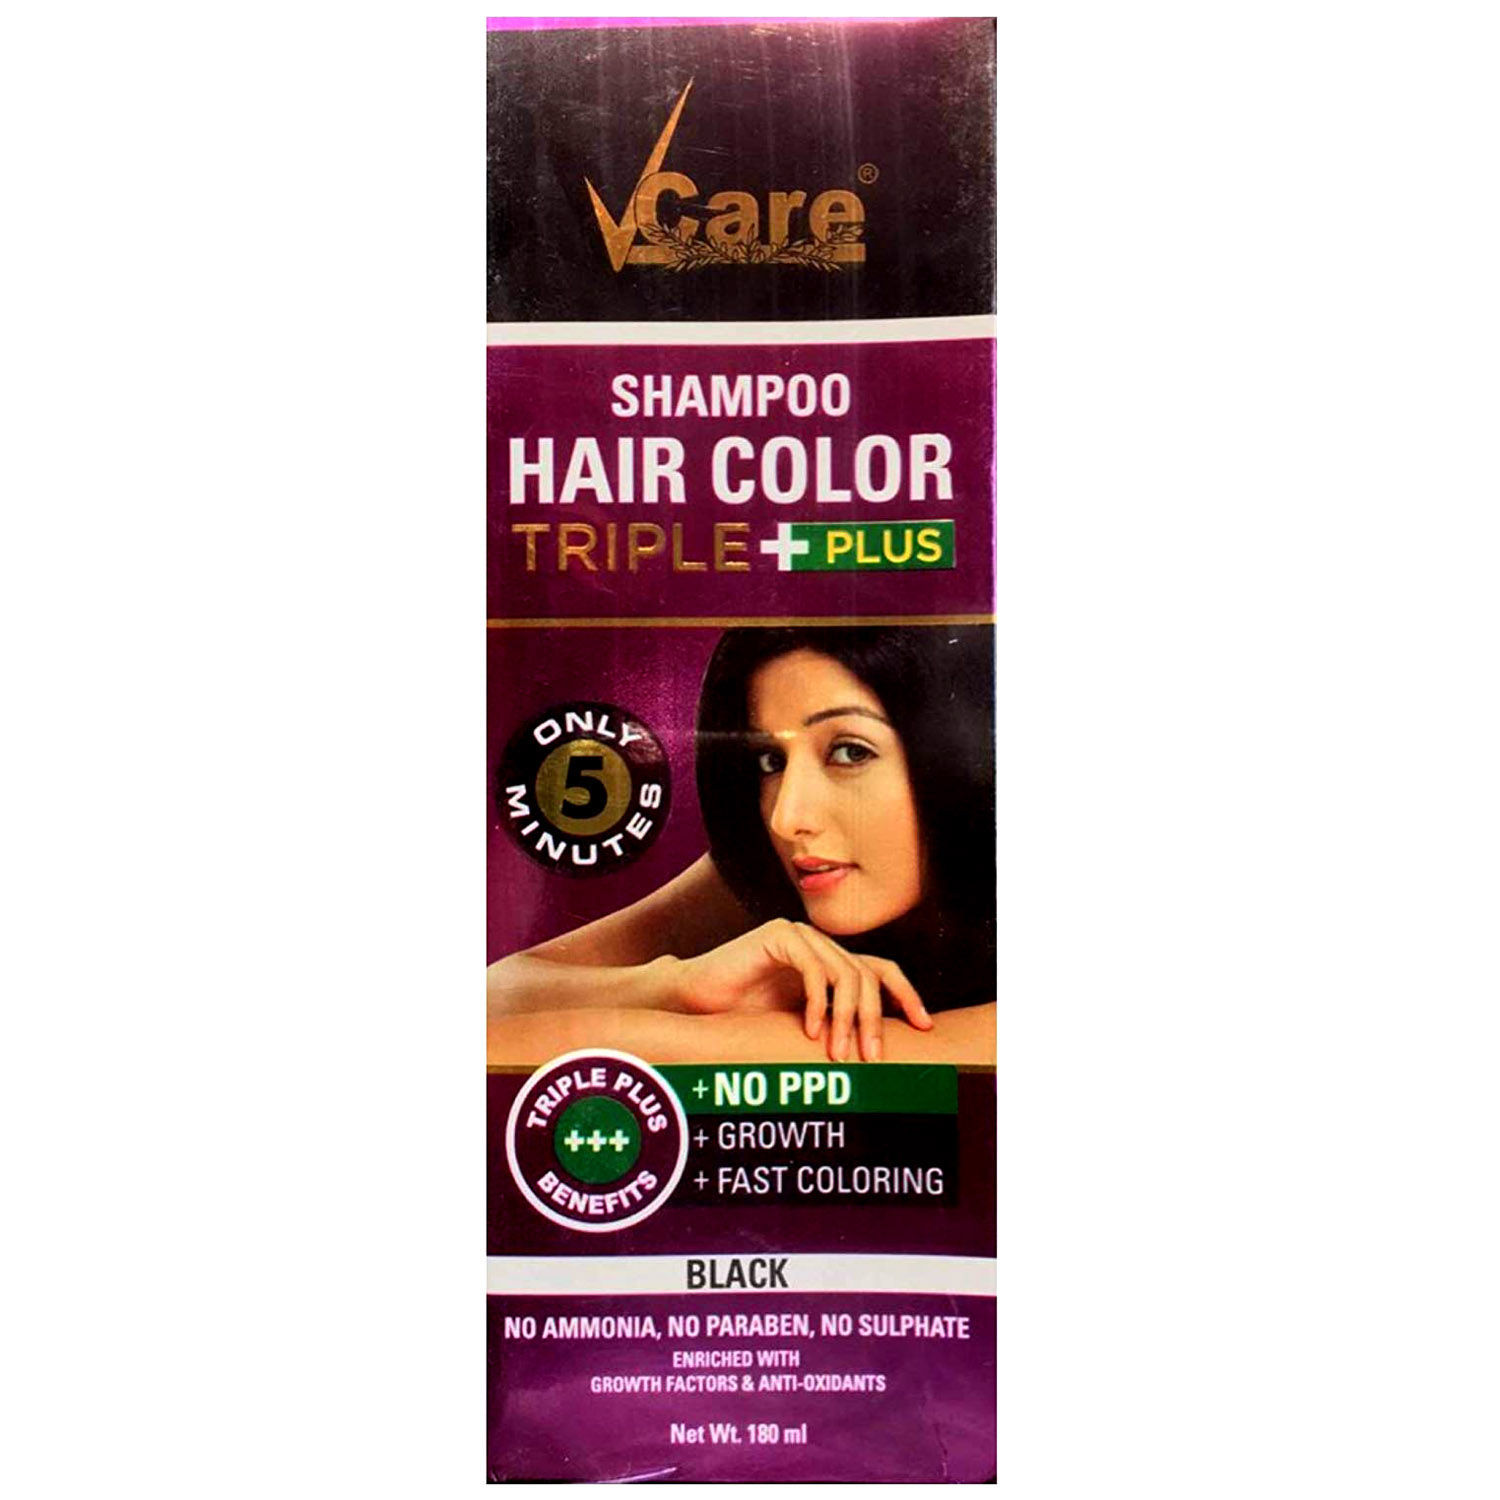 Vcare Triple Plus Hair Color Shampoo Black, 180ml Price, Uses, Side  Effects, Composition - Apollo Pharmacy